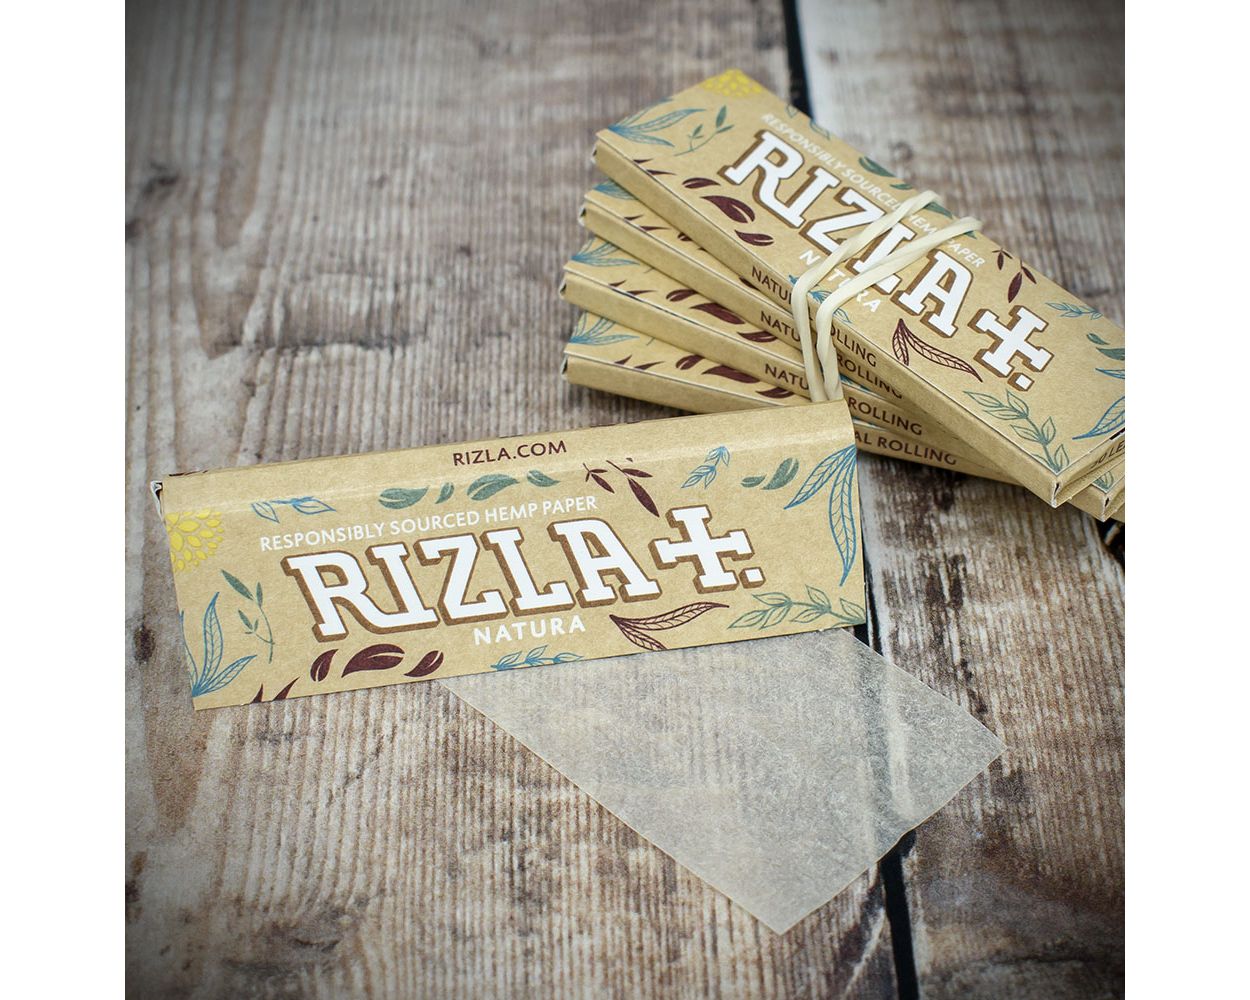 Rizla Natura Papers Make Your Own Cigarettes